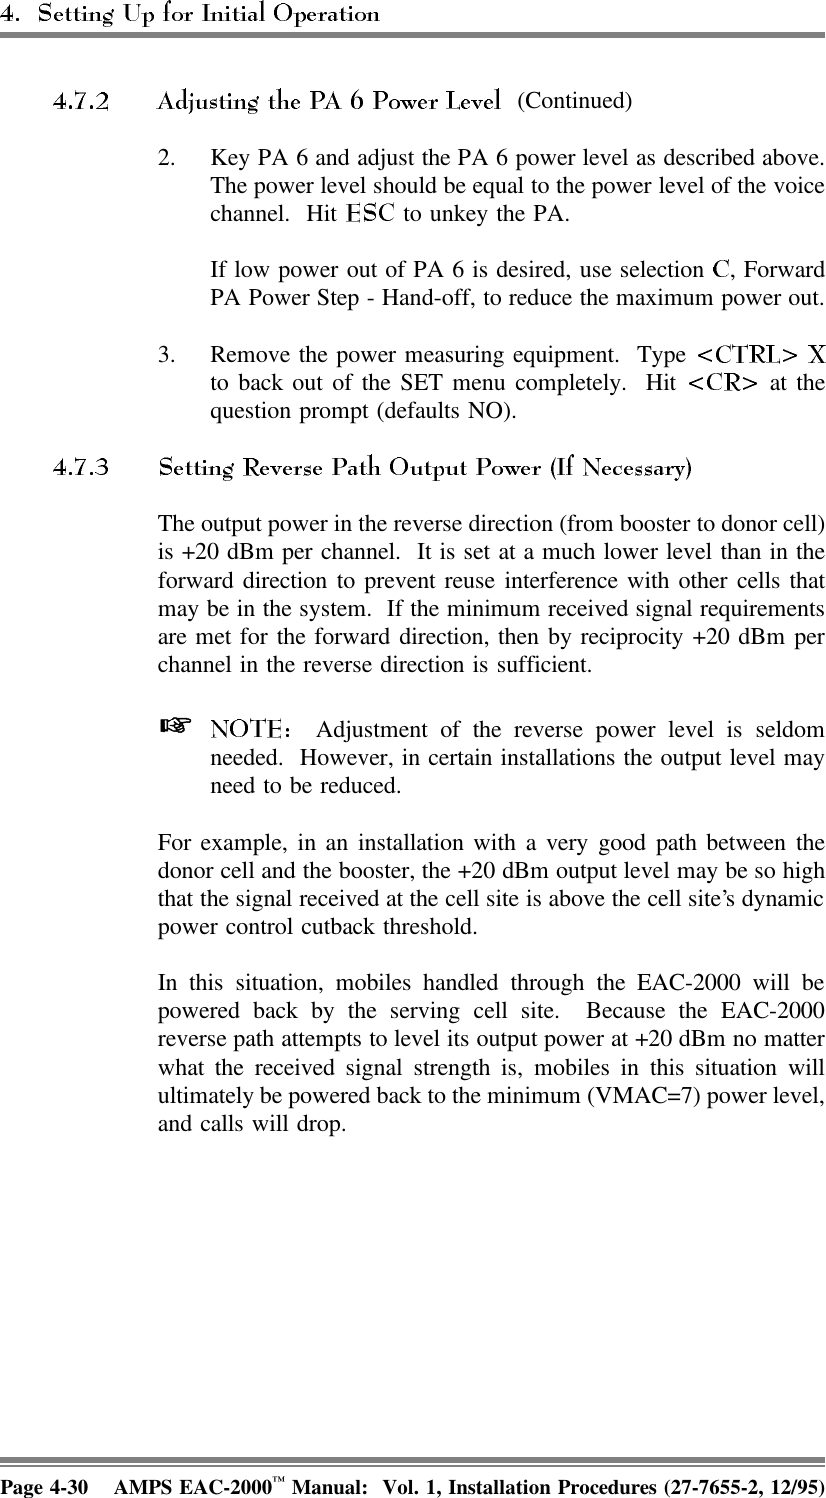  (Continued)2. Key PA 6 and adjust the PA 6 power level as described above.The power level should be equal to the power level of the voicechannel. Hit   to unkey the PA.If low power out of PA 6 is desired, use selection  , ForwardPA Power Step - Hand-off, to reduce the maximum power out.3. Remove the power measuring equipment.  Type to back out of the SET menu completely.  Hit   at thequestion prompt (defaults NO).The output power in the reverse direction (from booster to donor cell)is +20 dBm per channel.  It is set at a much lower level than in theforward direction to prevent reuse interference with other cells thatmay be in the system.  If the minimum received signal requirementsare met for the forward direction, then by reciprocity +20 dBm perchannel in the reverse direction is sufficient.   Adjustment of the reverse power level is seldomneeded.  However, in certain installations the output level mayneed to be reduced.For example, in an installation with a very good path between thedonor cell and the booster, the +20 dBm output level may be so highthat the signal received at the cell site is above the cell site’s dynamicpower control cutback threshold. In this situation, mobiles handled through the EAC-2000 will bepowered back by the serving cell site.  Because the EAC-2000reverse path attempts to level its output power at +20 dBm no matterwhat the received signal strength is, mobiles in this situation willultimately be powered back to the minimum (VMAC=7) power level,and calls will drop.Page 4-30 AMPS EAC-2000™ Manual:  Vol. 1, Installation Procedures (27-7655-2, 12/95)